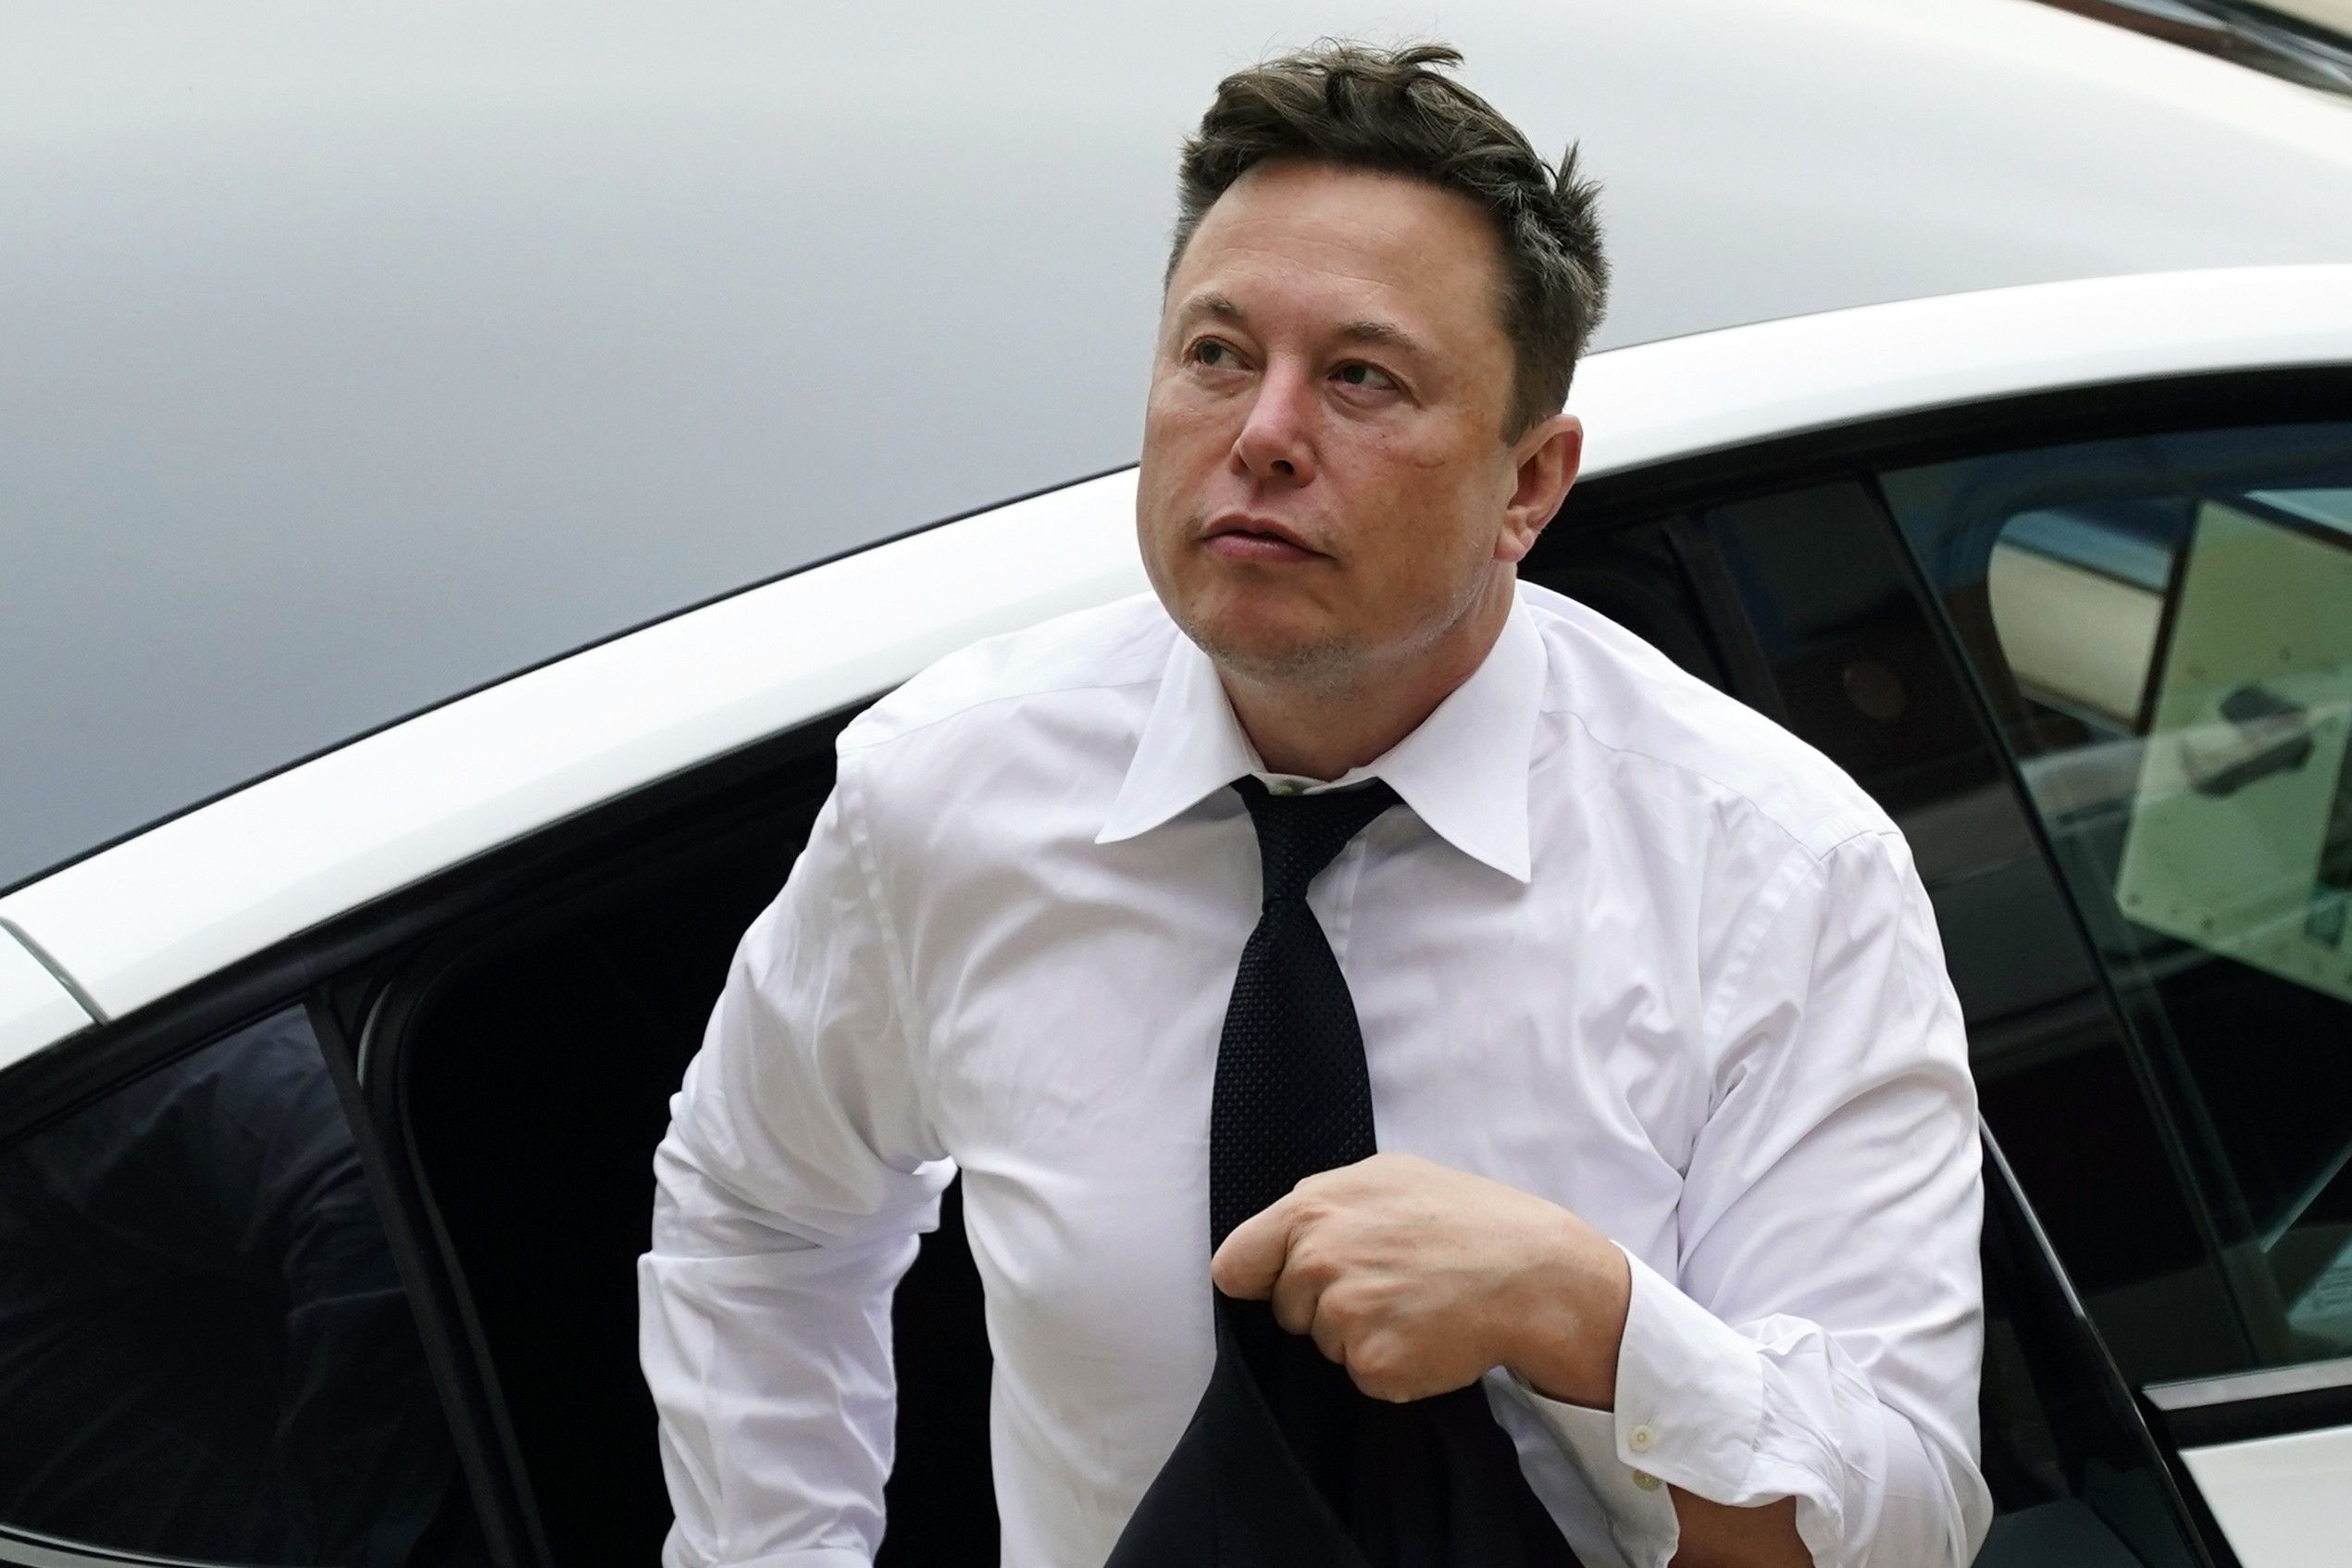 Elon Musk arrives at the justice center in Wilmington, Delaware, on July 13, 2021.